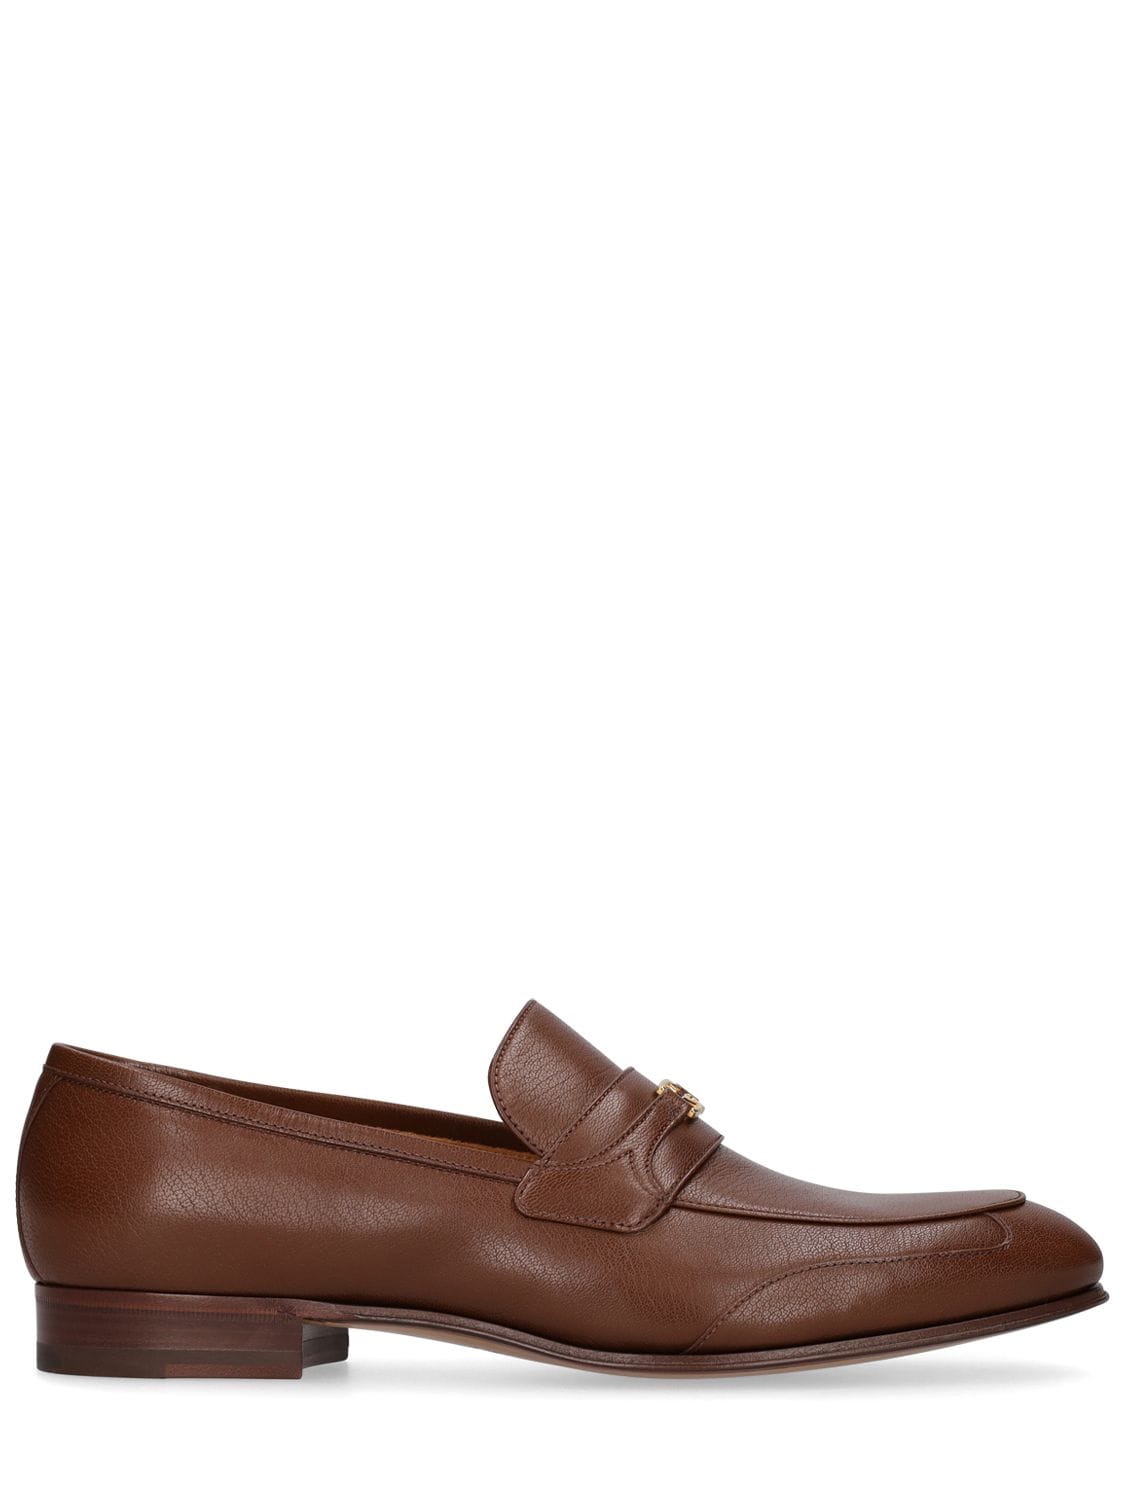 Lovanio Leather Loafers